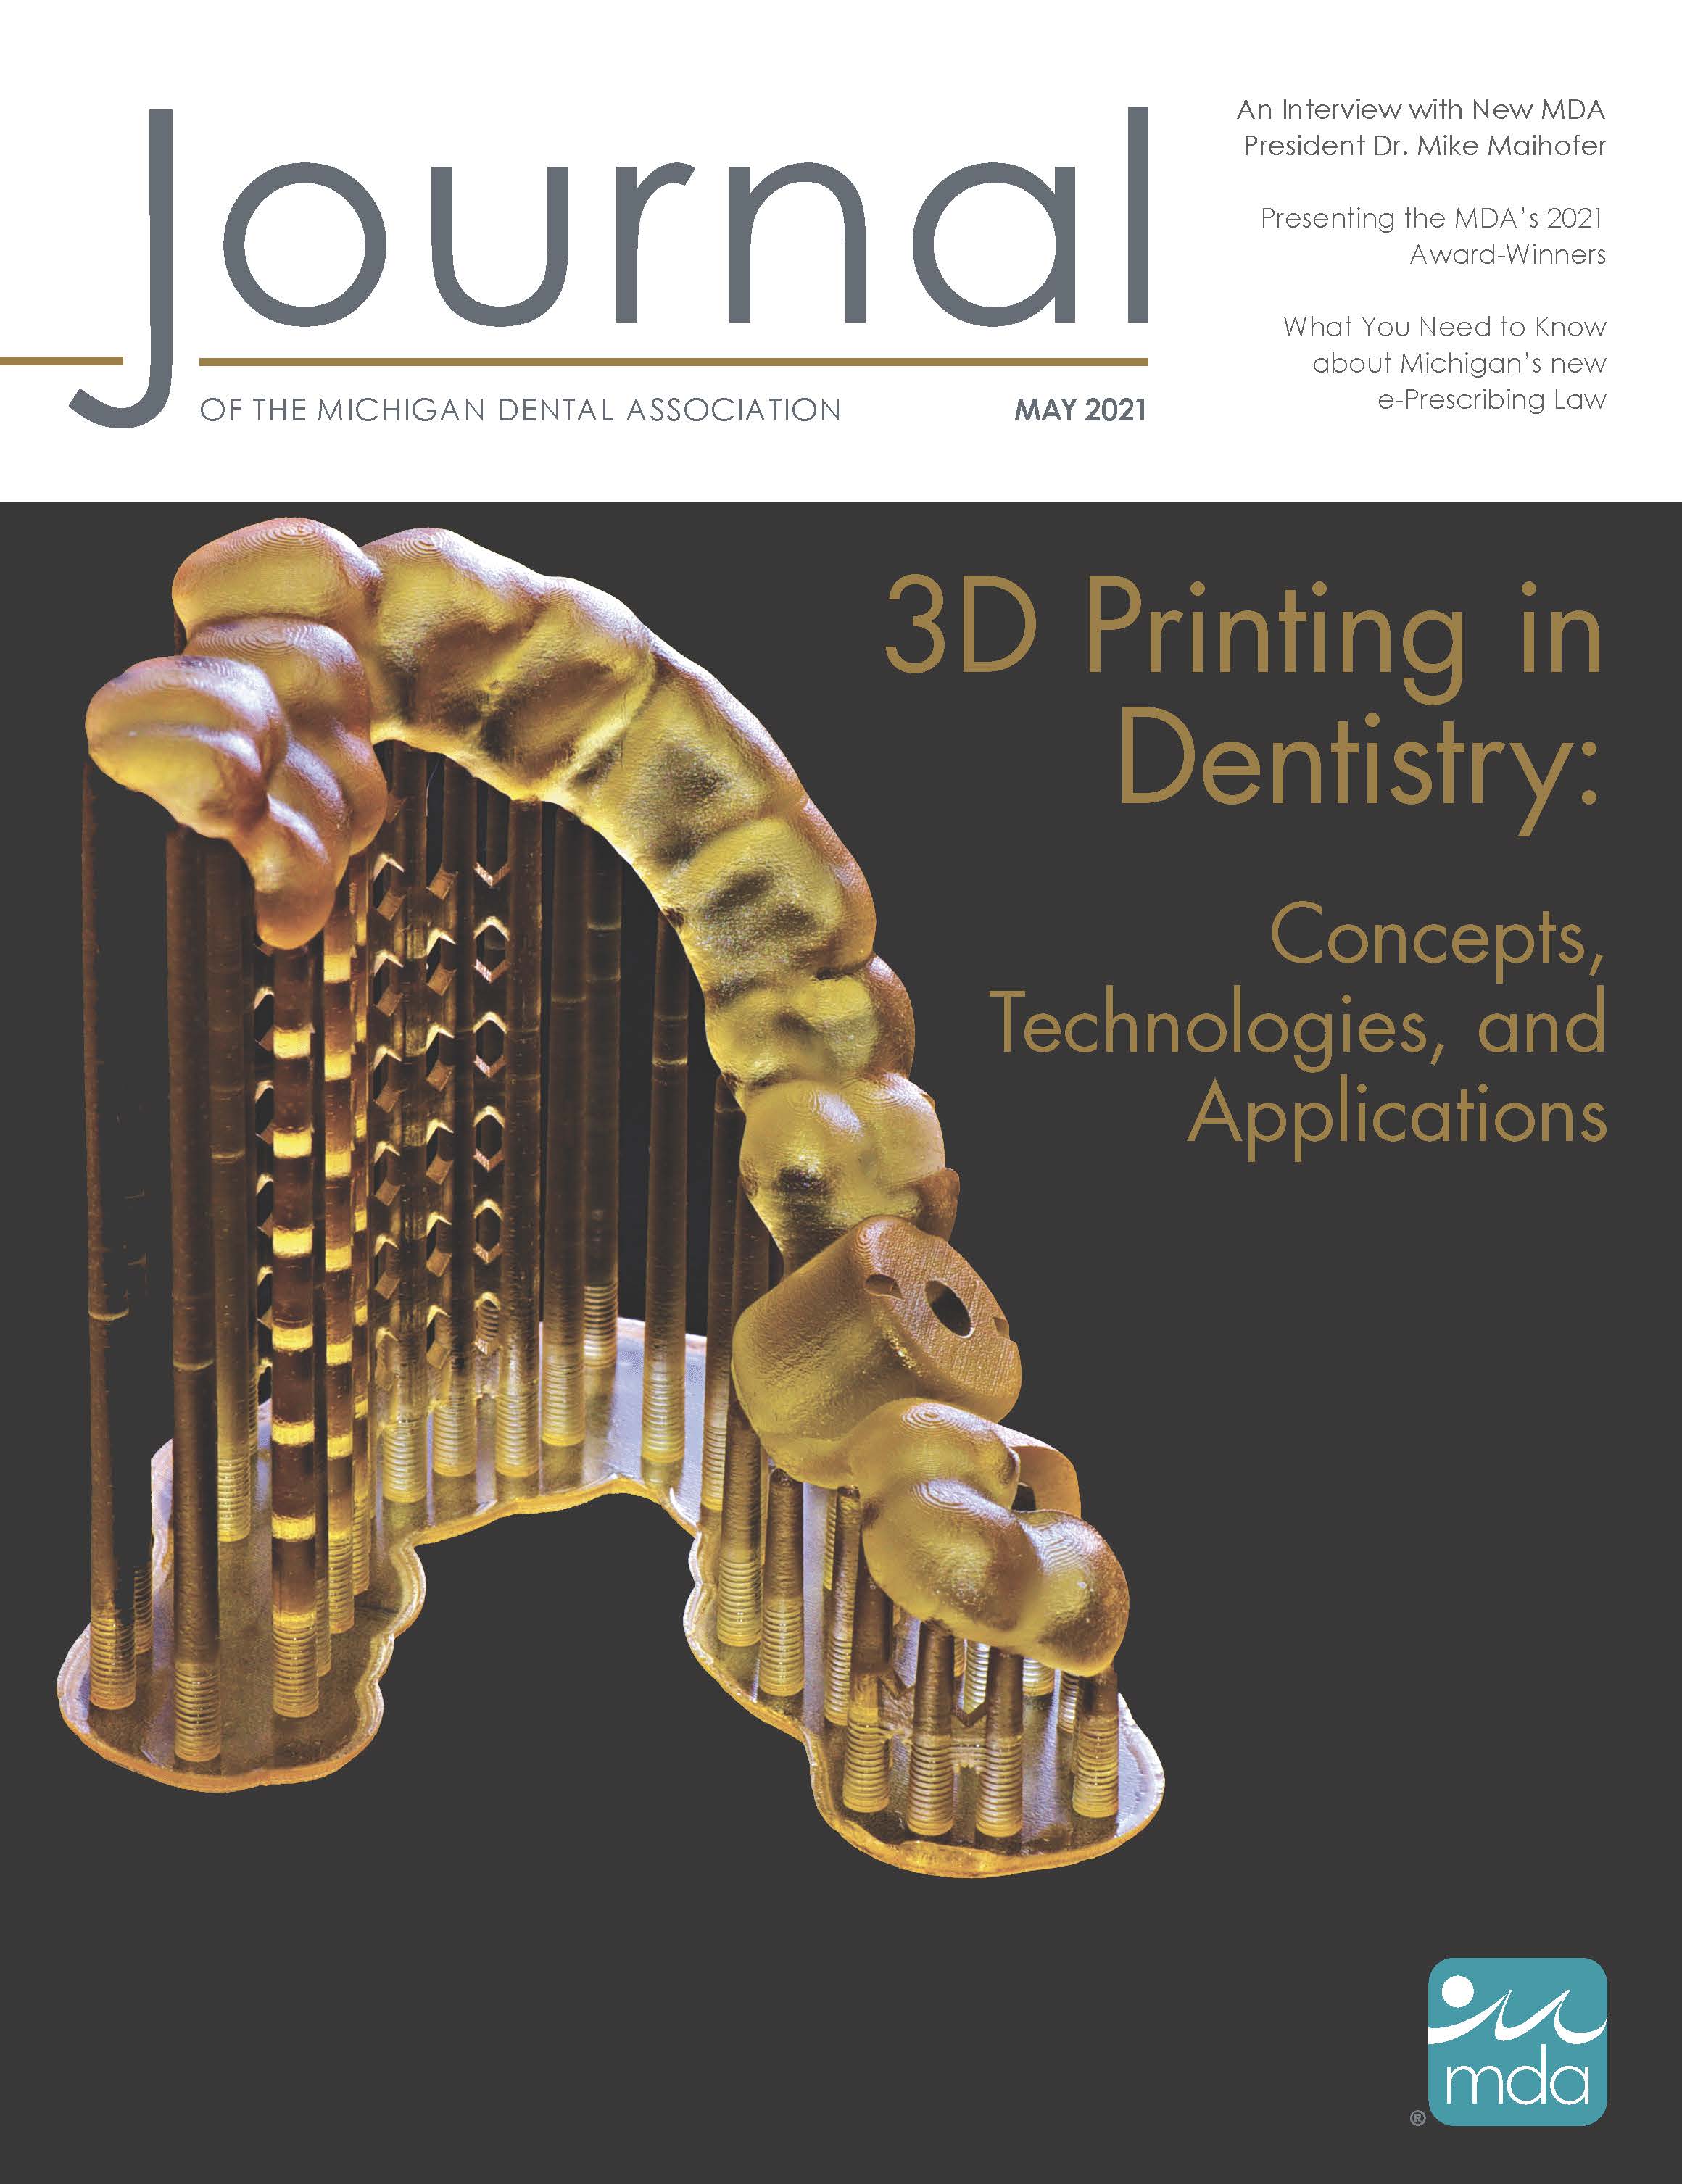 Cover of the Journal of the Michigan Dental Association with an image of an implant placement surgical pilot drill guide, post-cured and still on its printing platform raft.